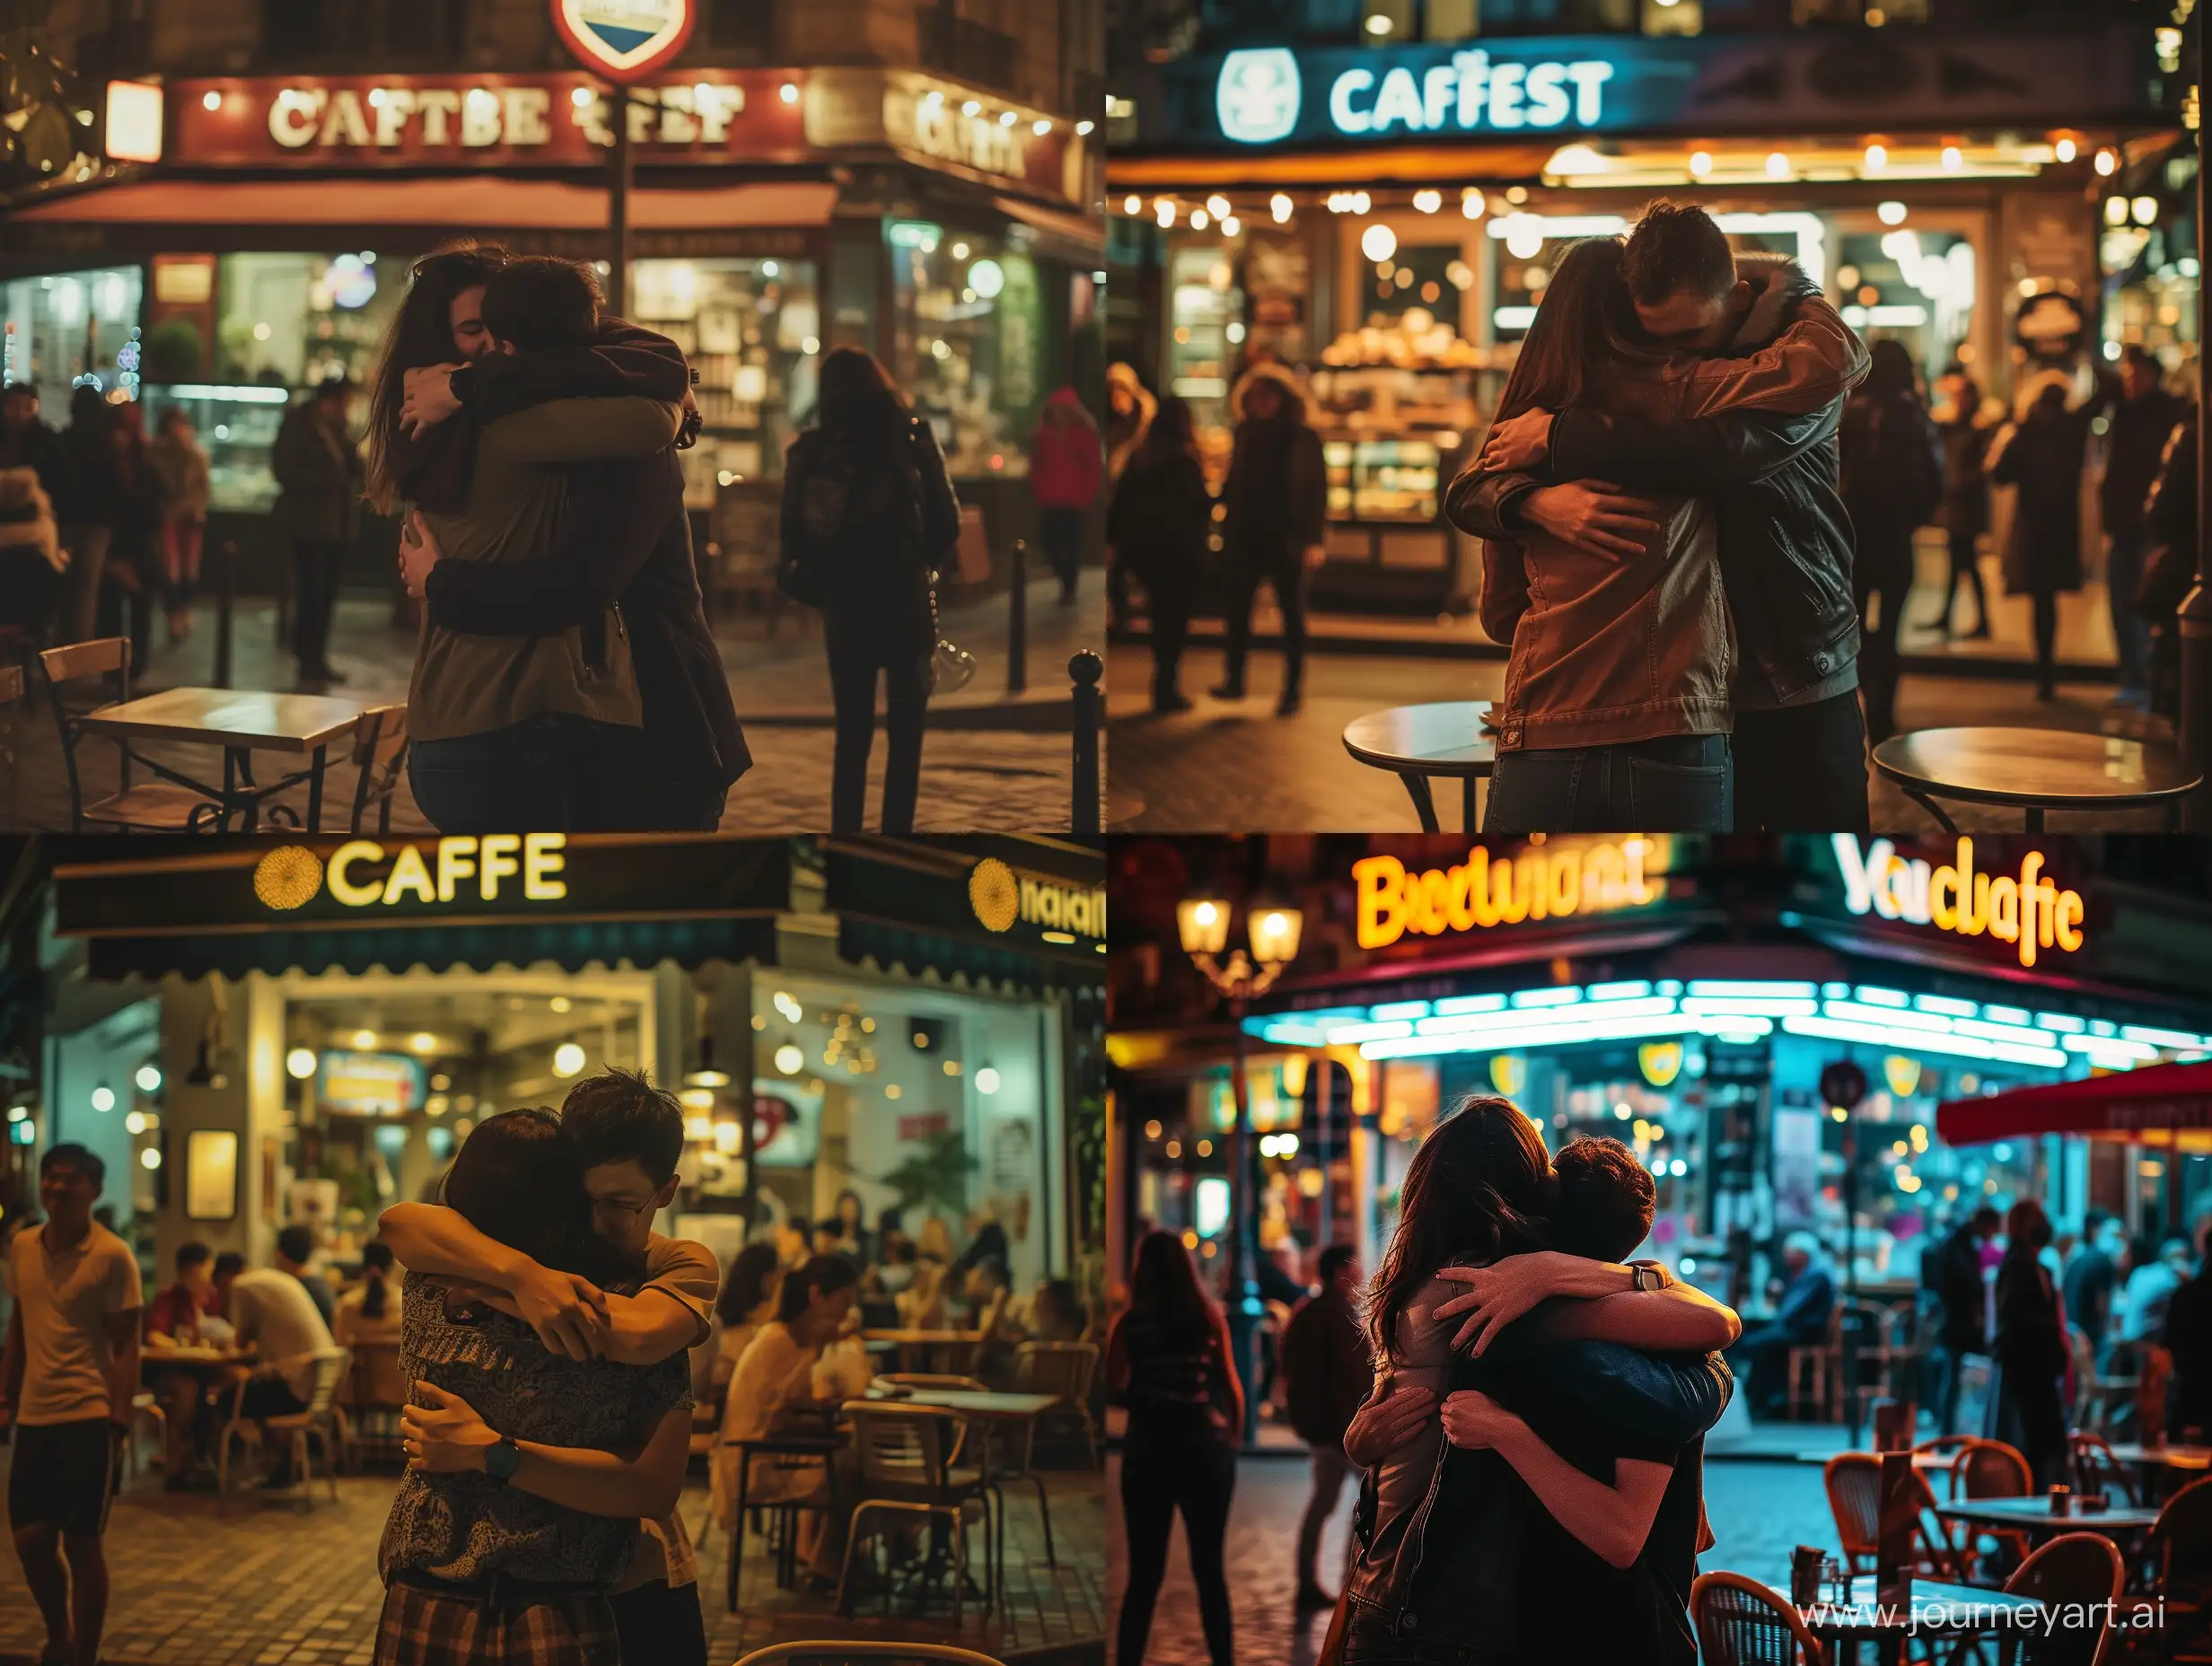 Embracing-Love-at-Night-Romantic-Couple-Hugging-by-a-Vibrant-Cafe